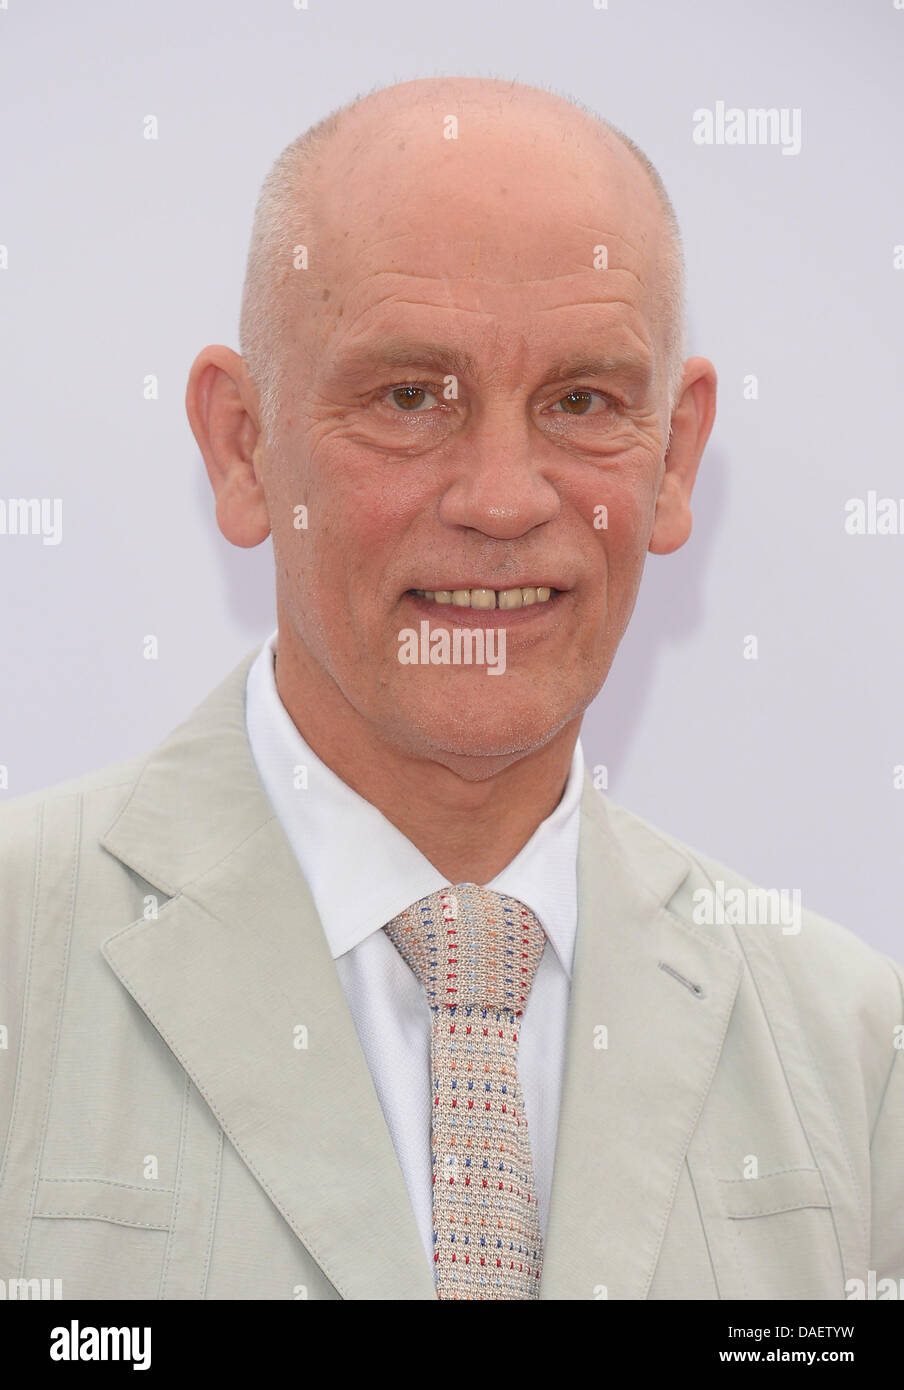 Los Angeles, USA. 11th July, 2013. John Malkovich arrives at the film premiere for Red2 in Los Angeles, California. July 11th 2013 Credit:  Sydney Alford/Alamy Live News Stock Photo